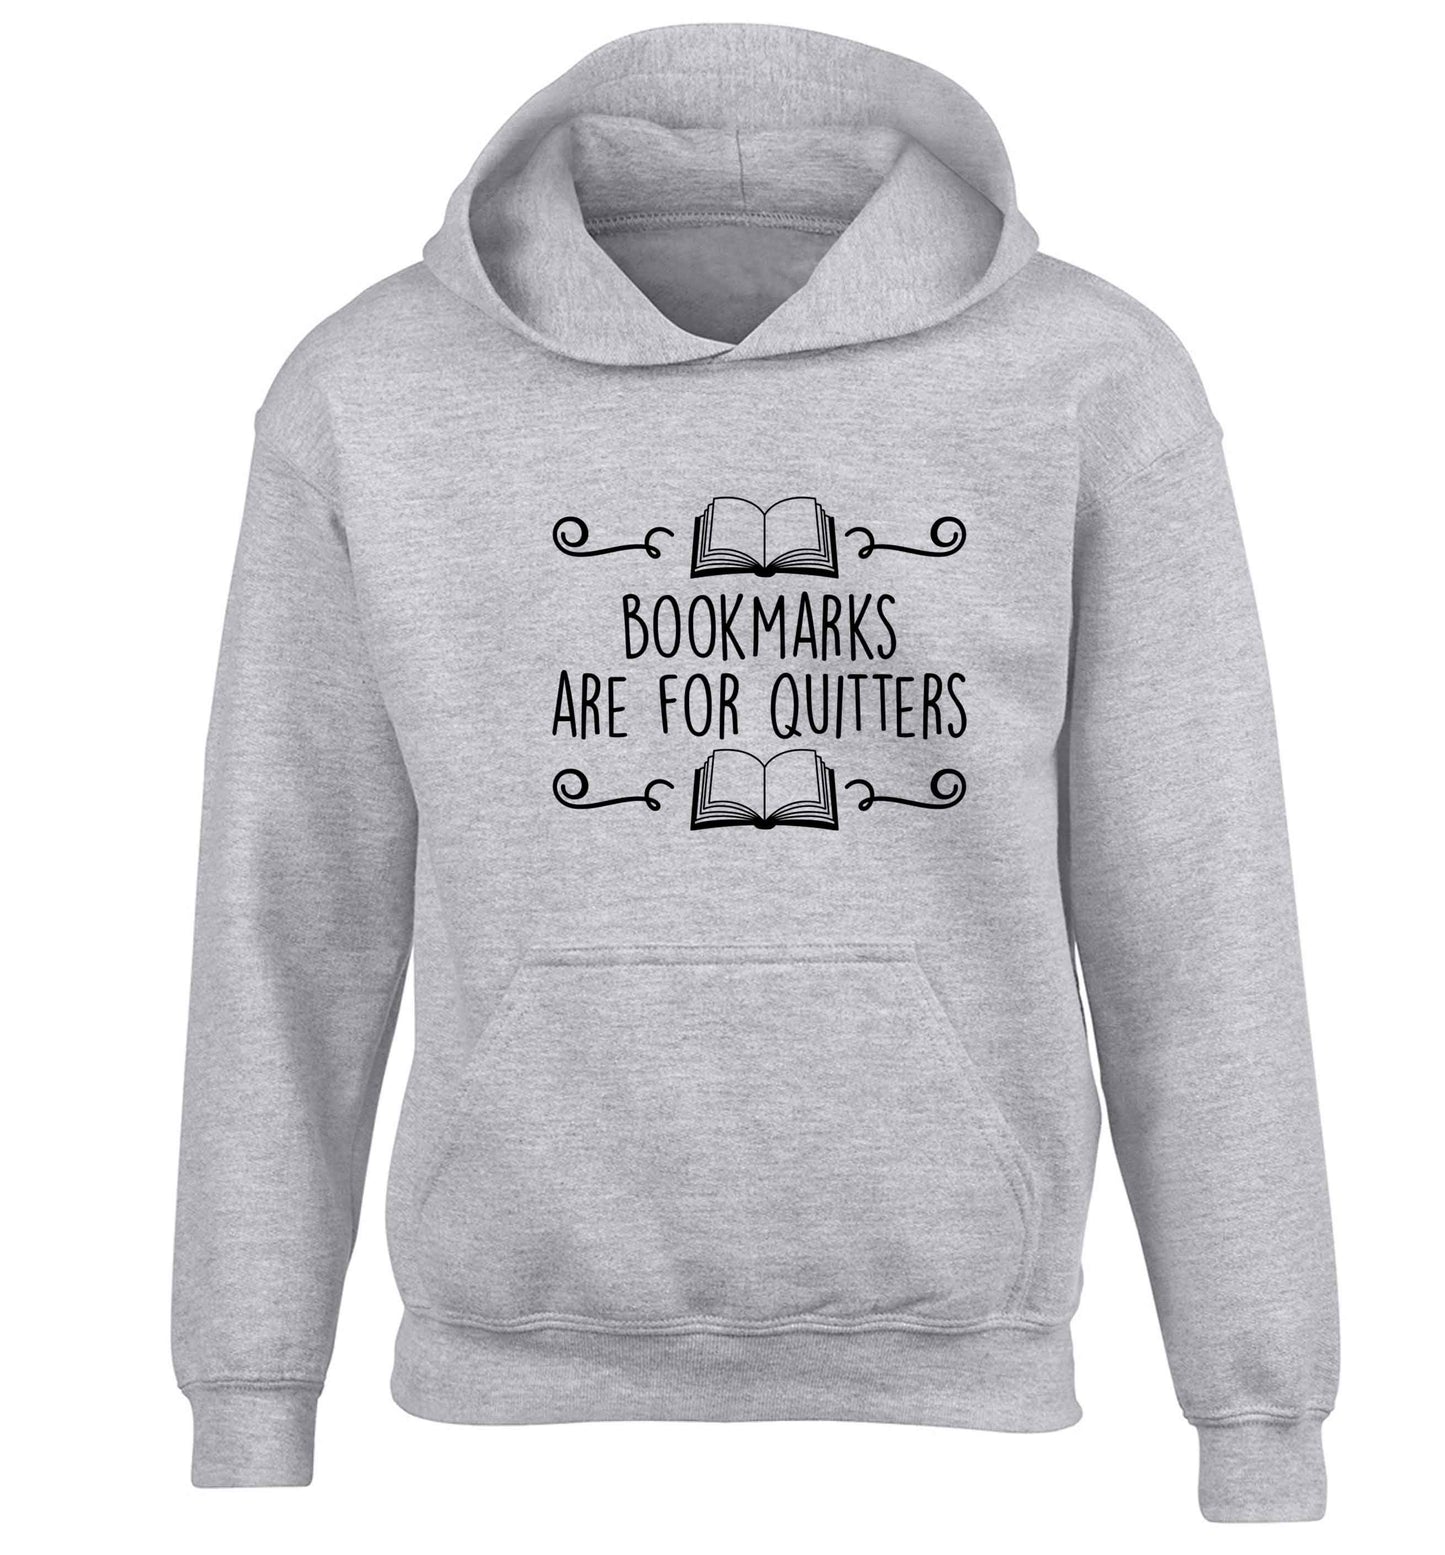 Bookmarks are for quitters children's grey hoodie 12-13 Years